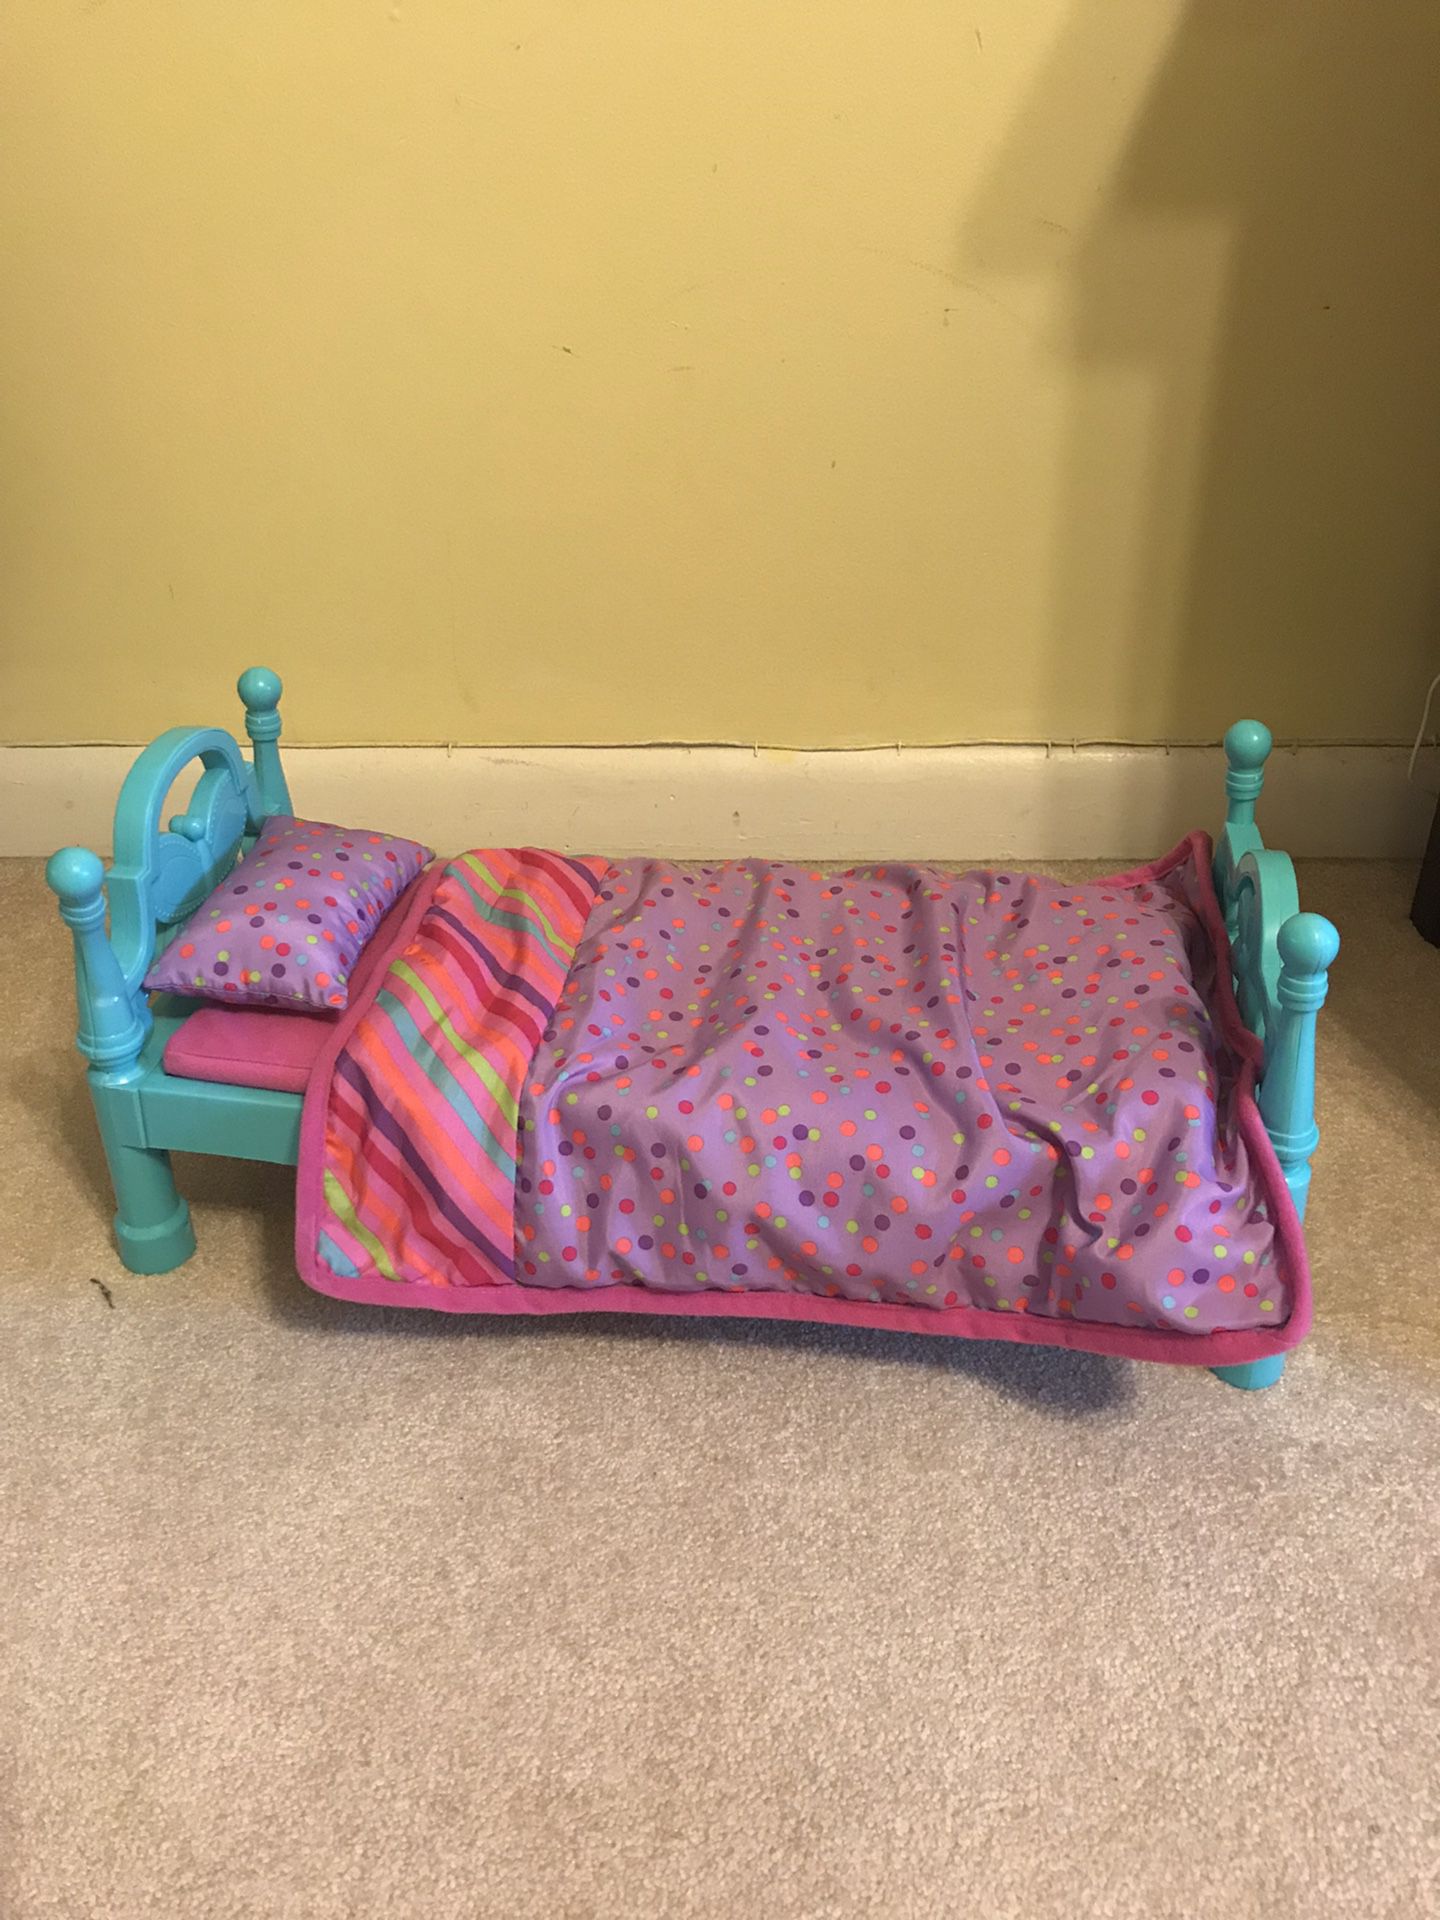 American Girl doll bed